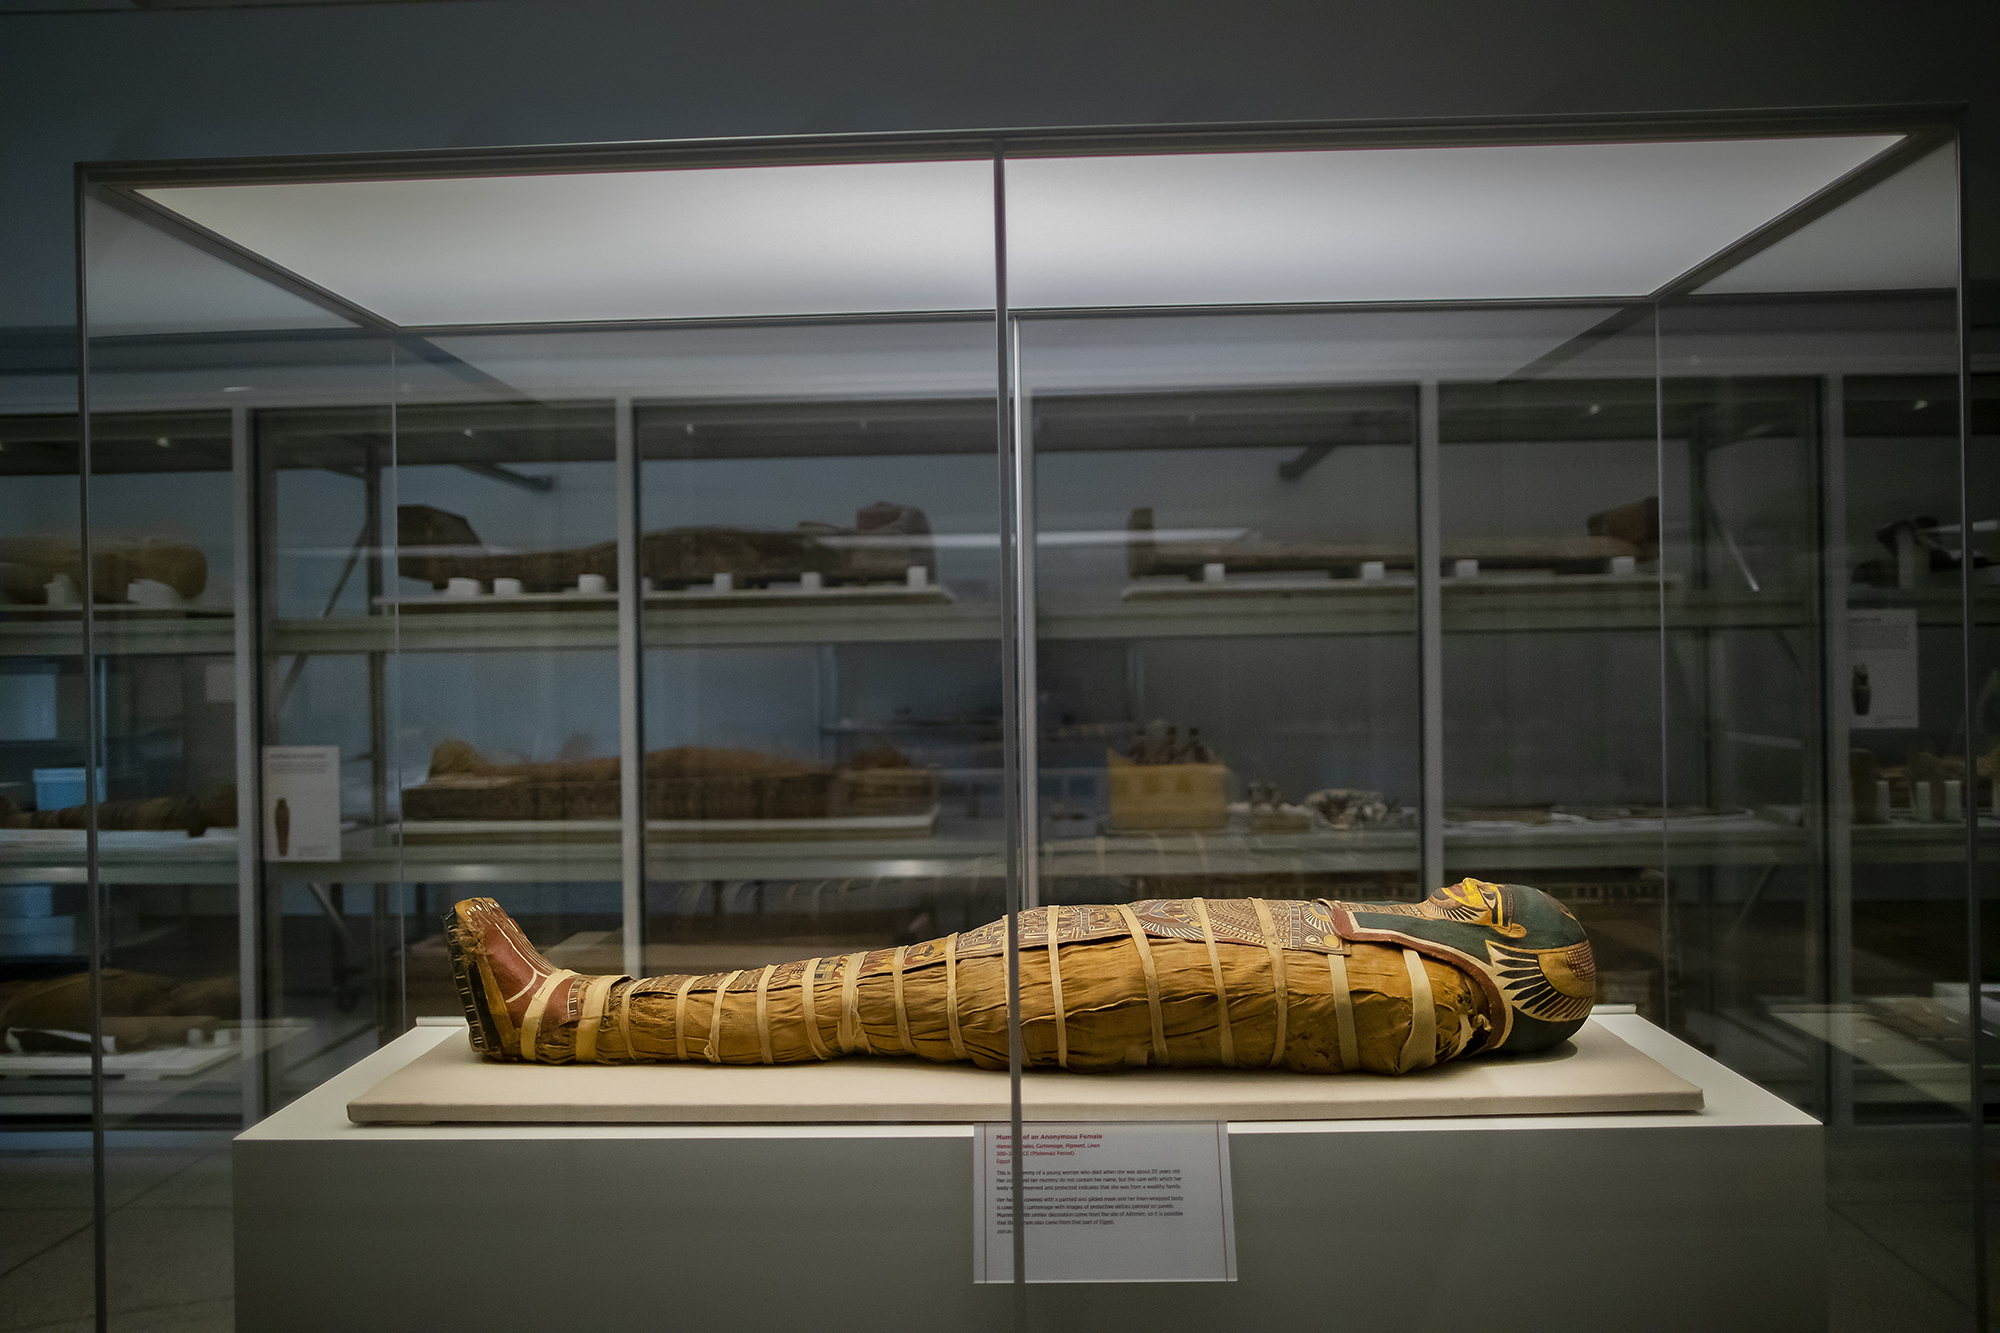 mummy in the visible storage area